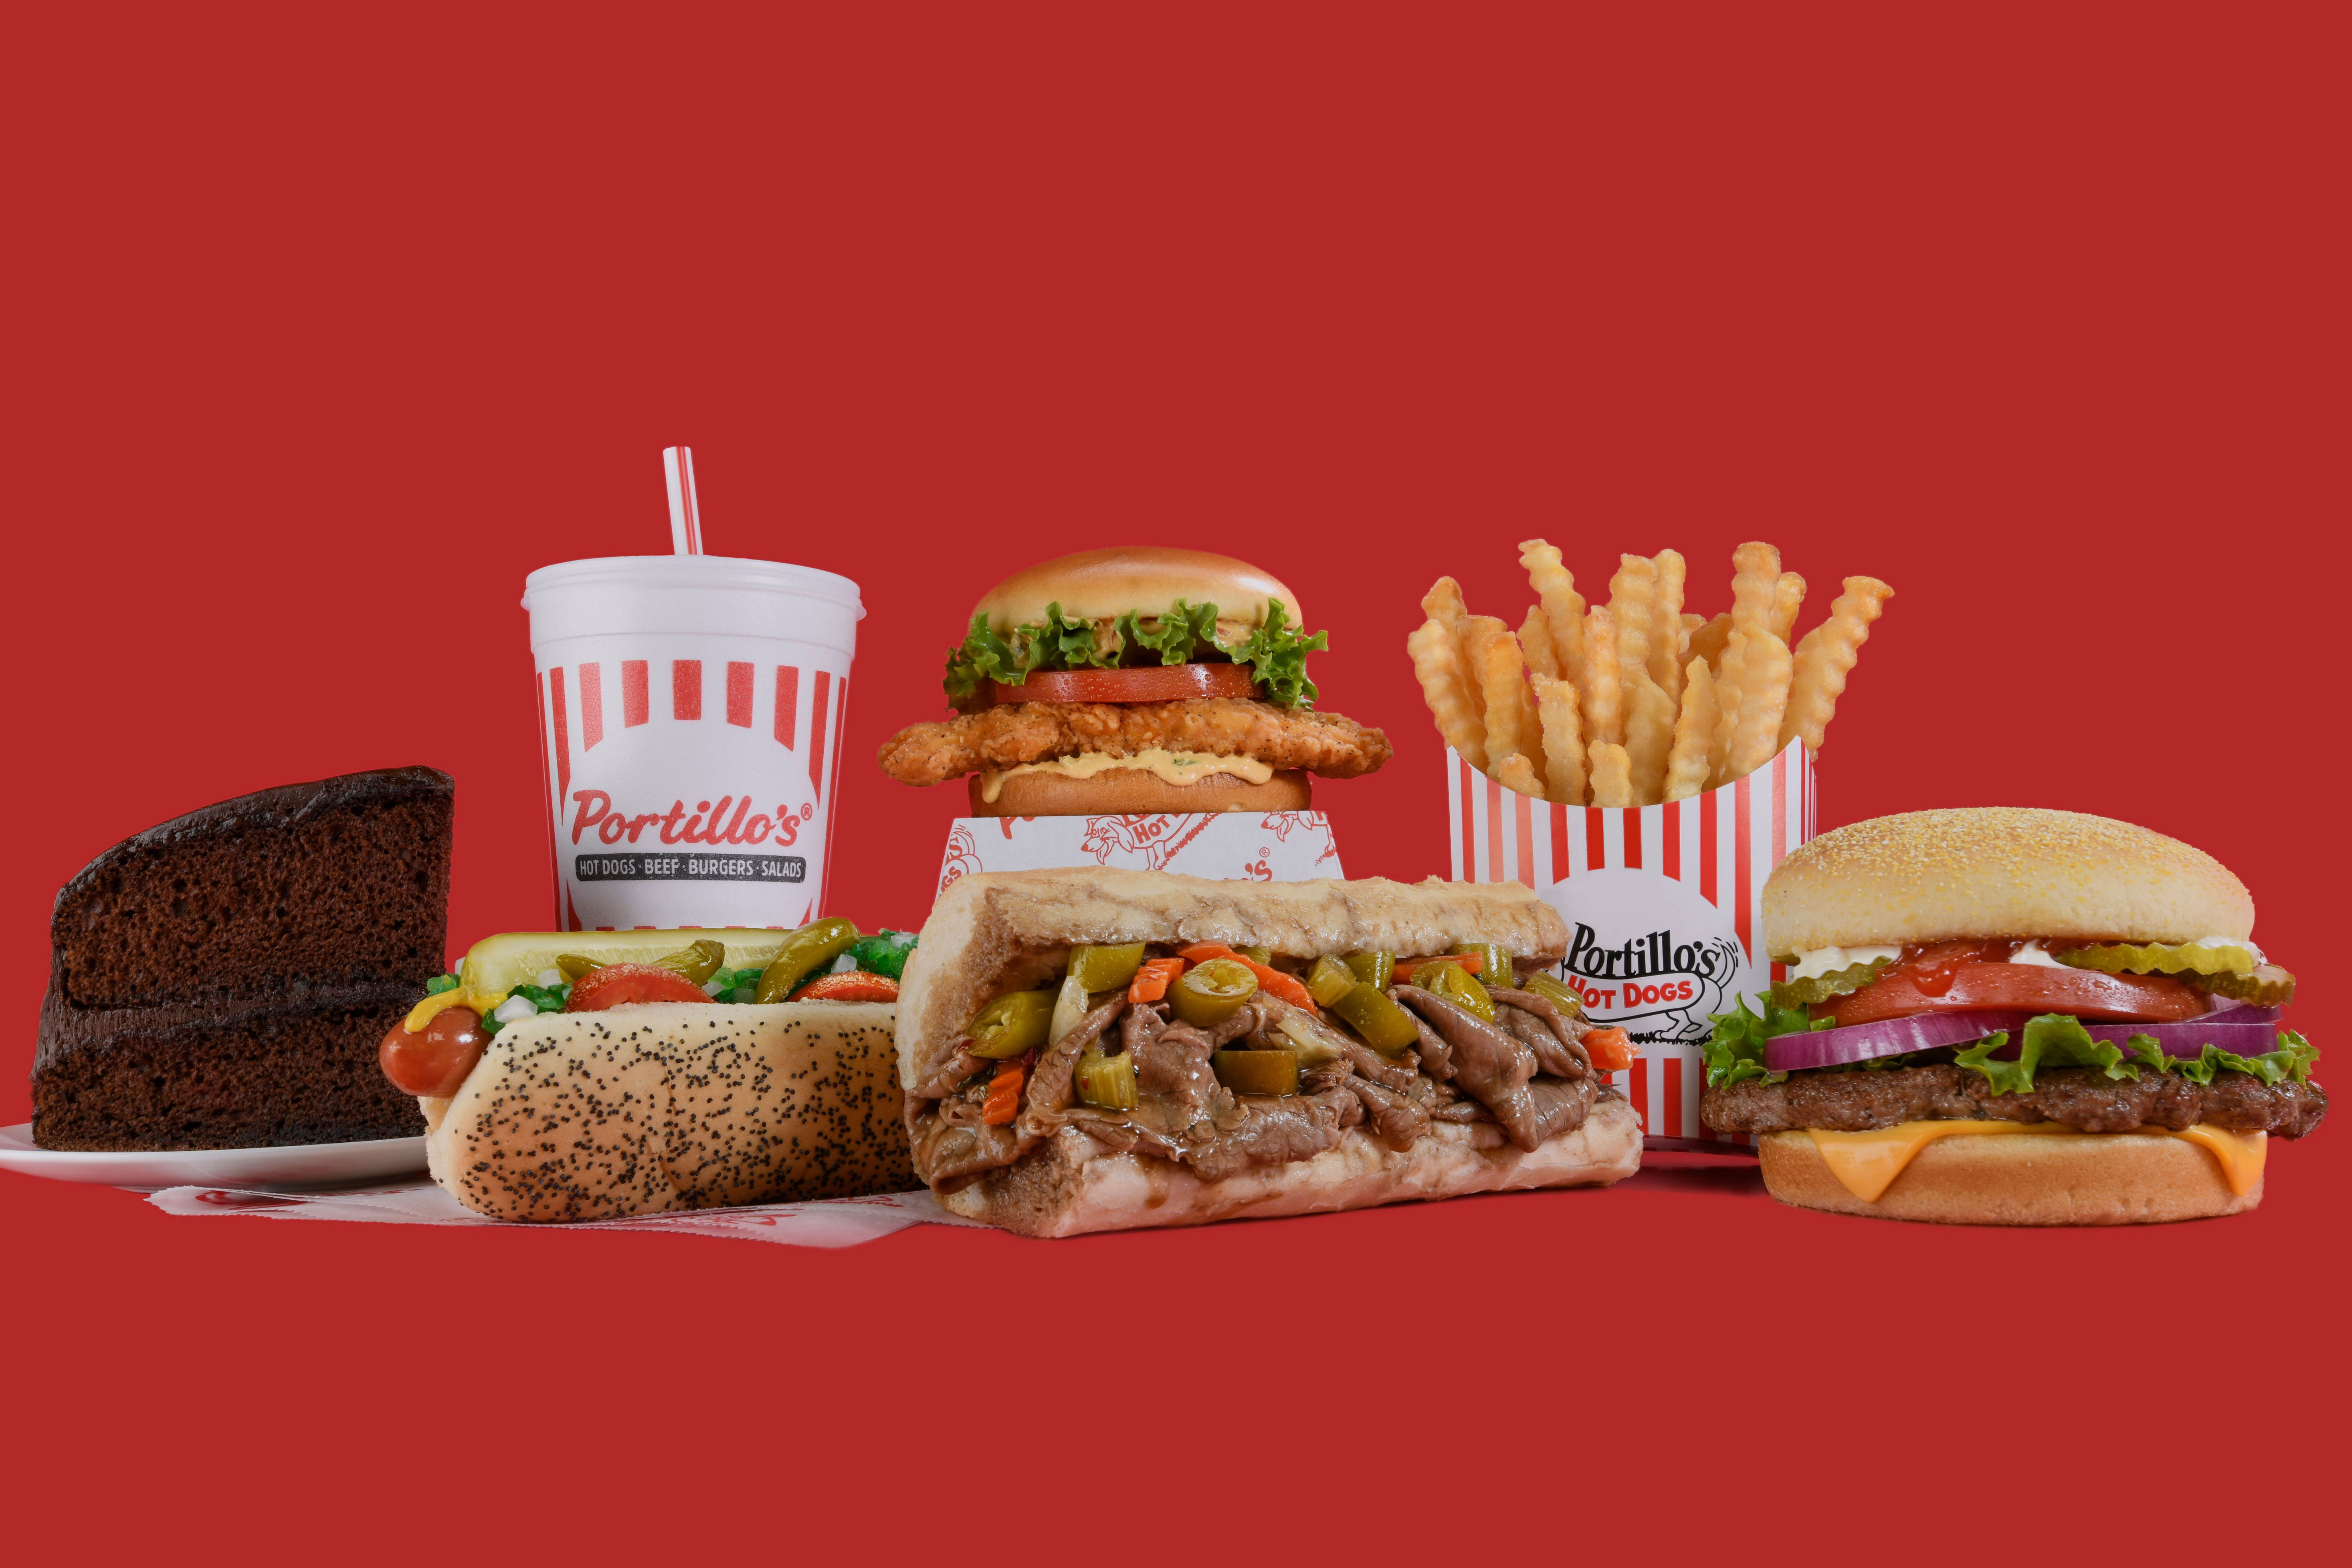 Portillo's is expanding in Chicagoland - News - News | Portillo's Fast food